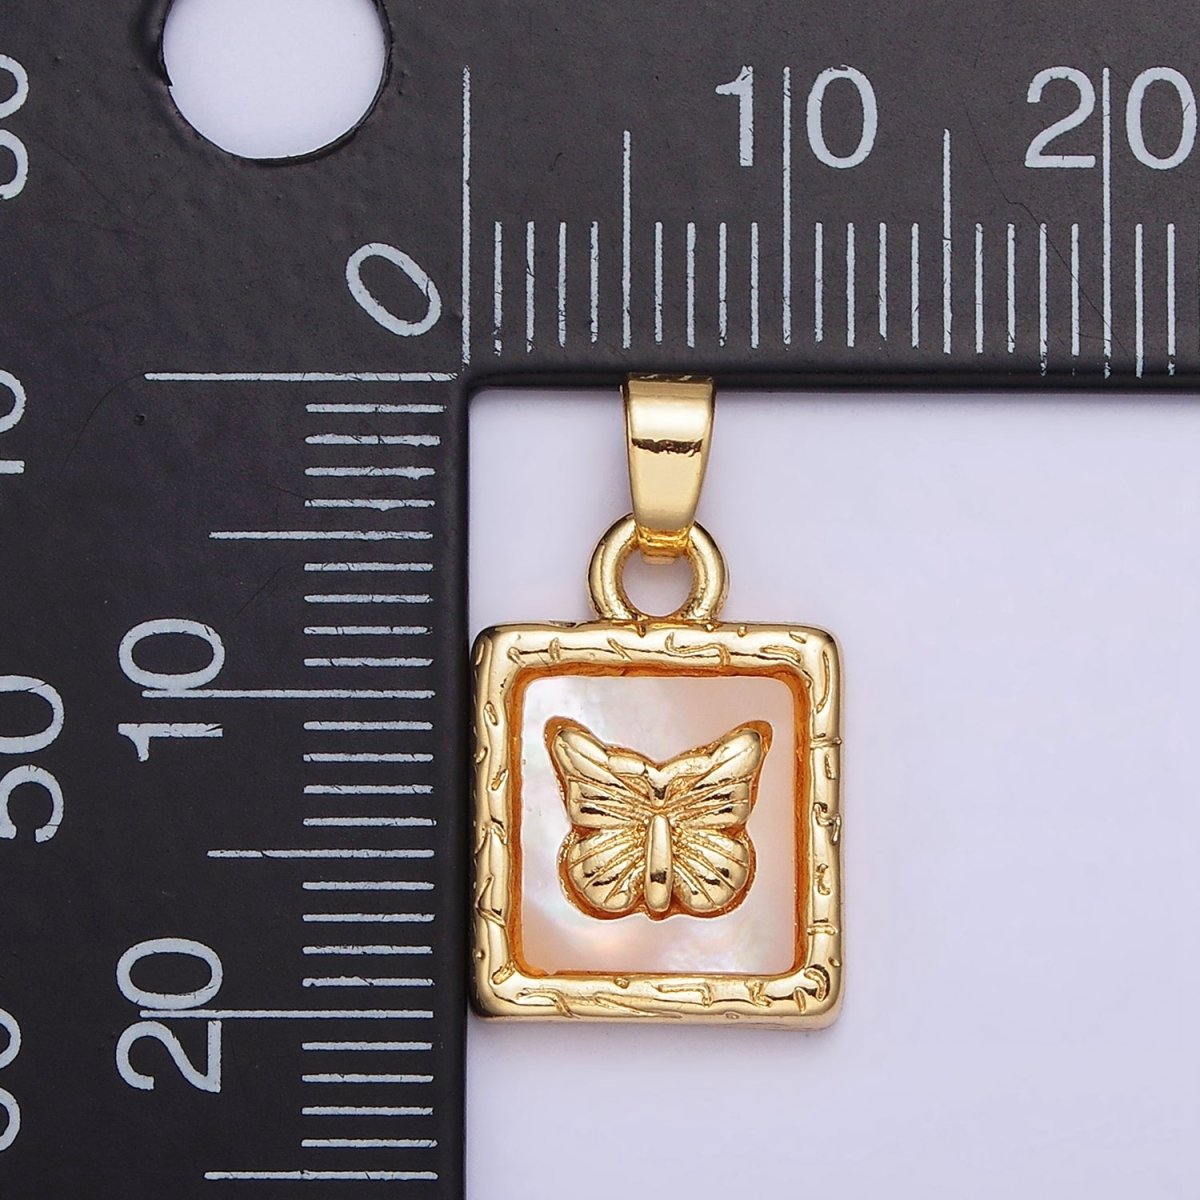 24K Gold Filled Butterfly Mariposa Shell Pearl Line-Textured Square Pendant | AA594 - DLUXCA